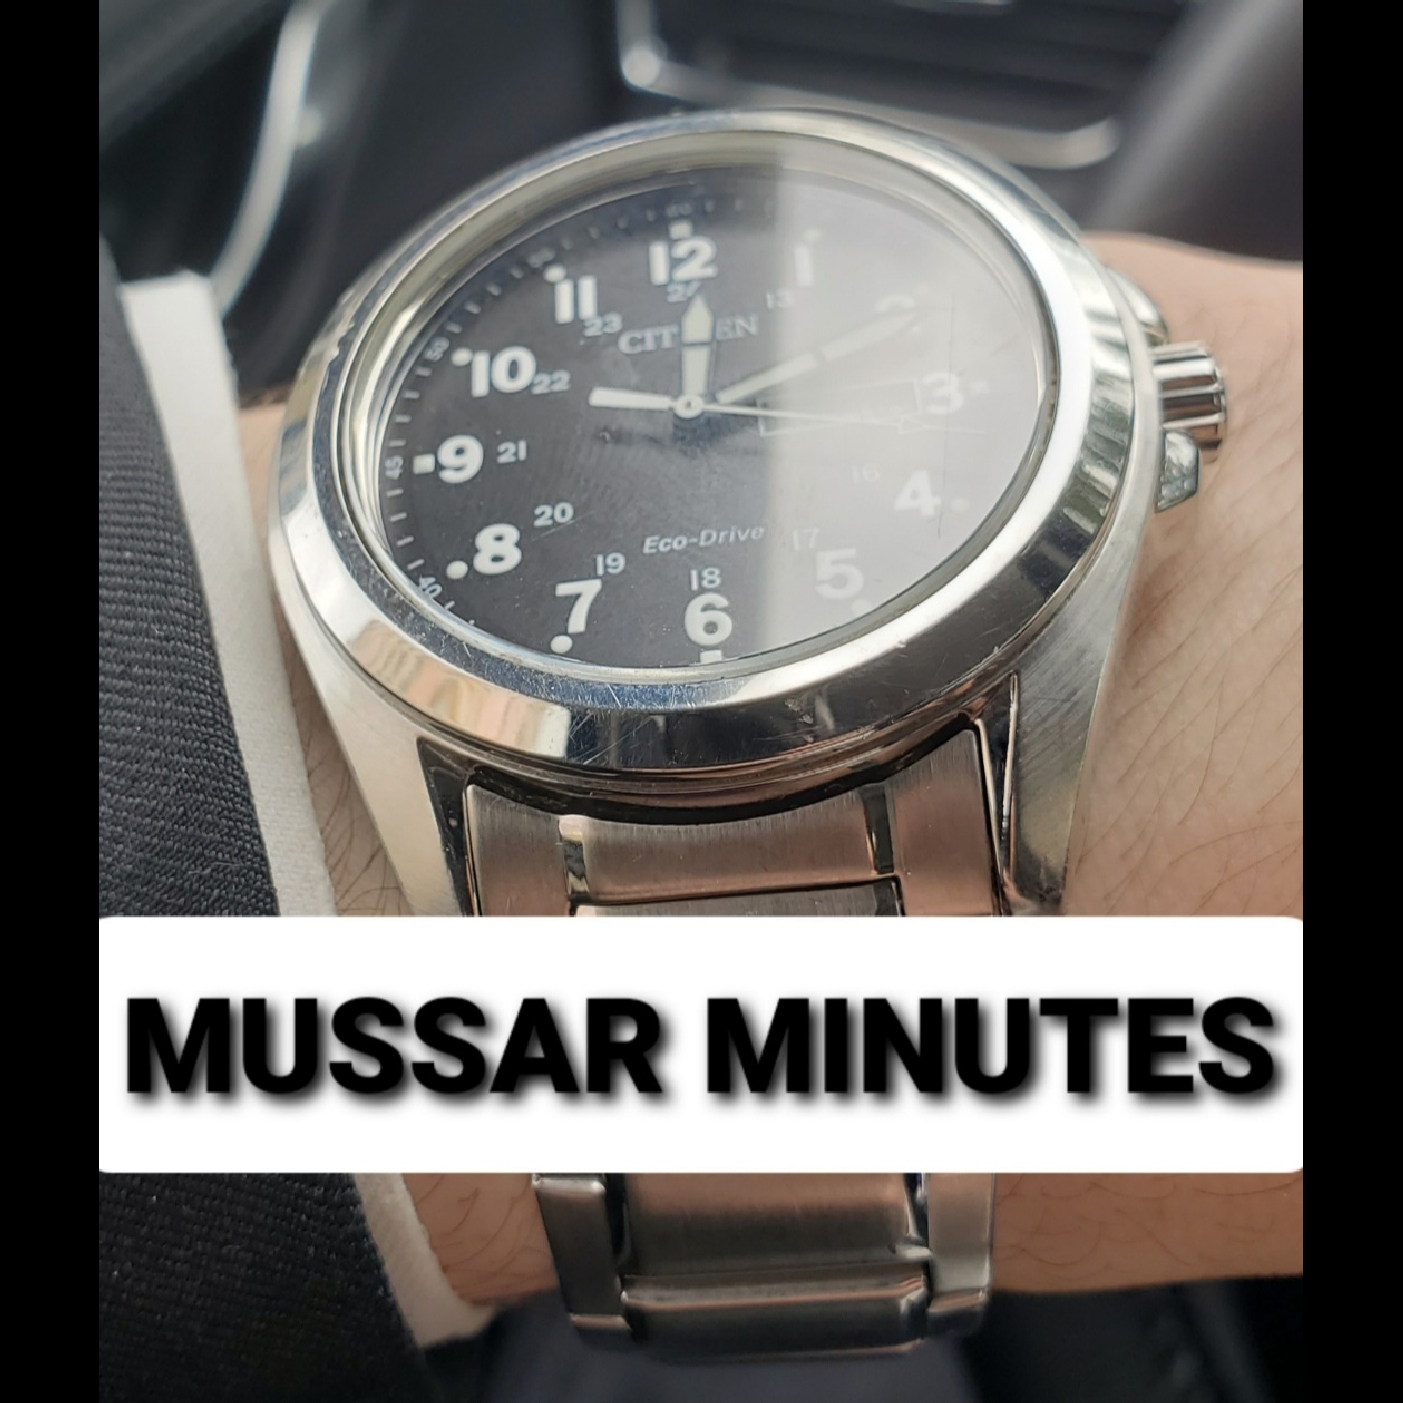 Mussar Minutes - Vayechi: When is the Right Time for Mussar? Is it Ever Too Late? ⏰